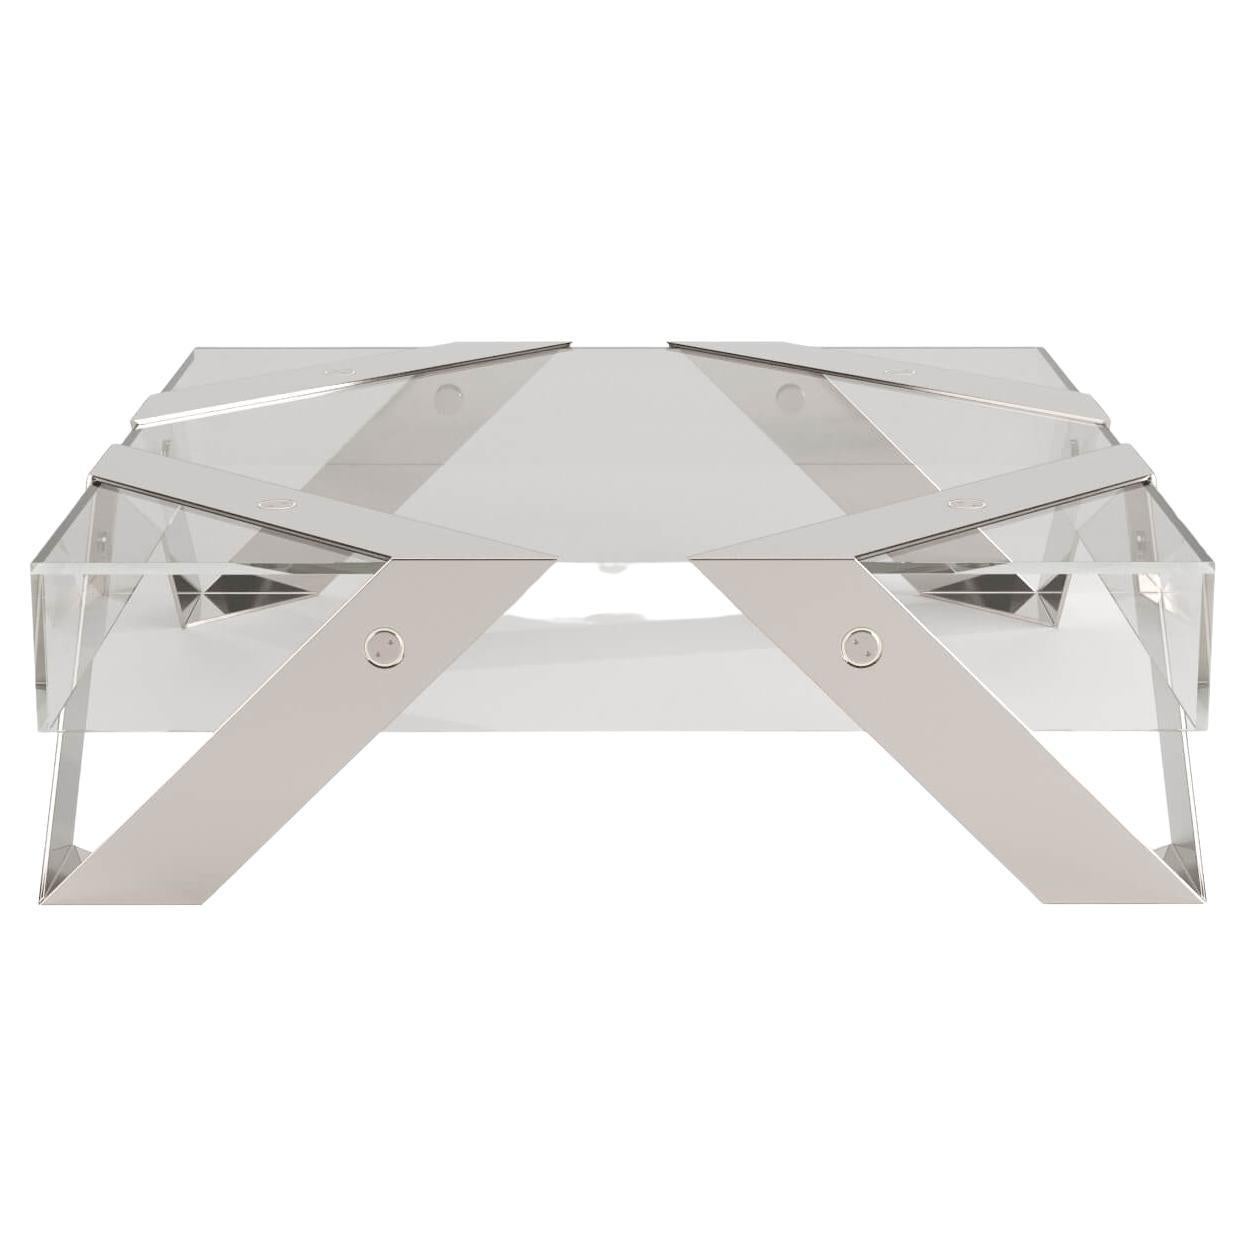 Award-Winning Center Coffee Table in Tempered Glass and Polished Stainless Steel